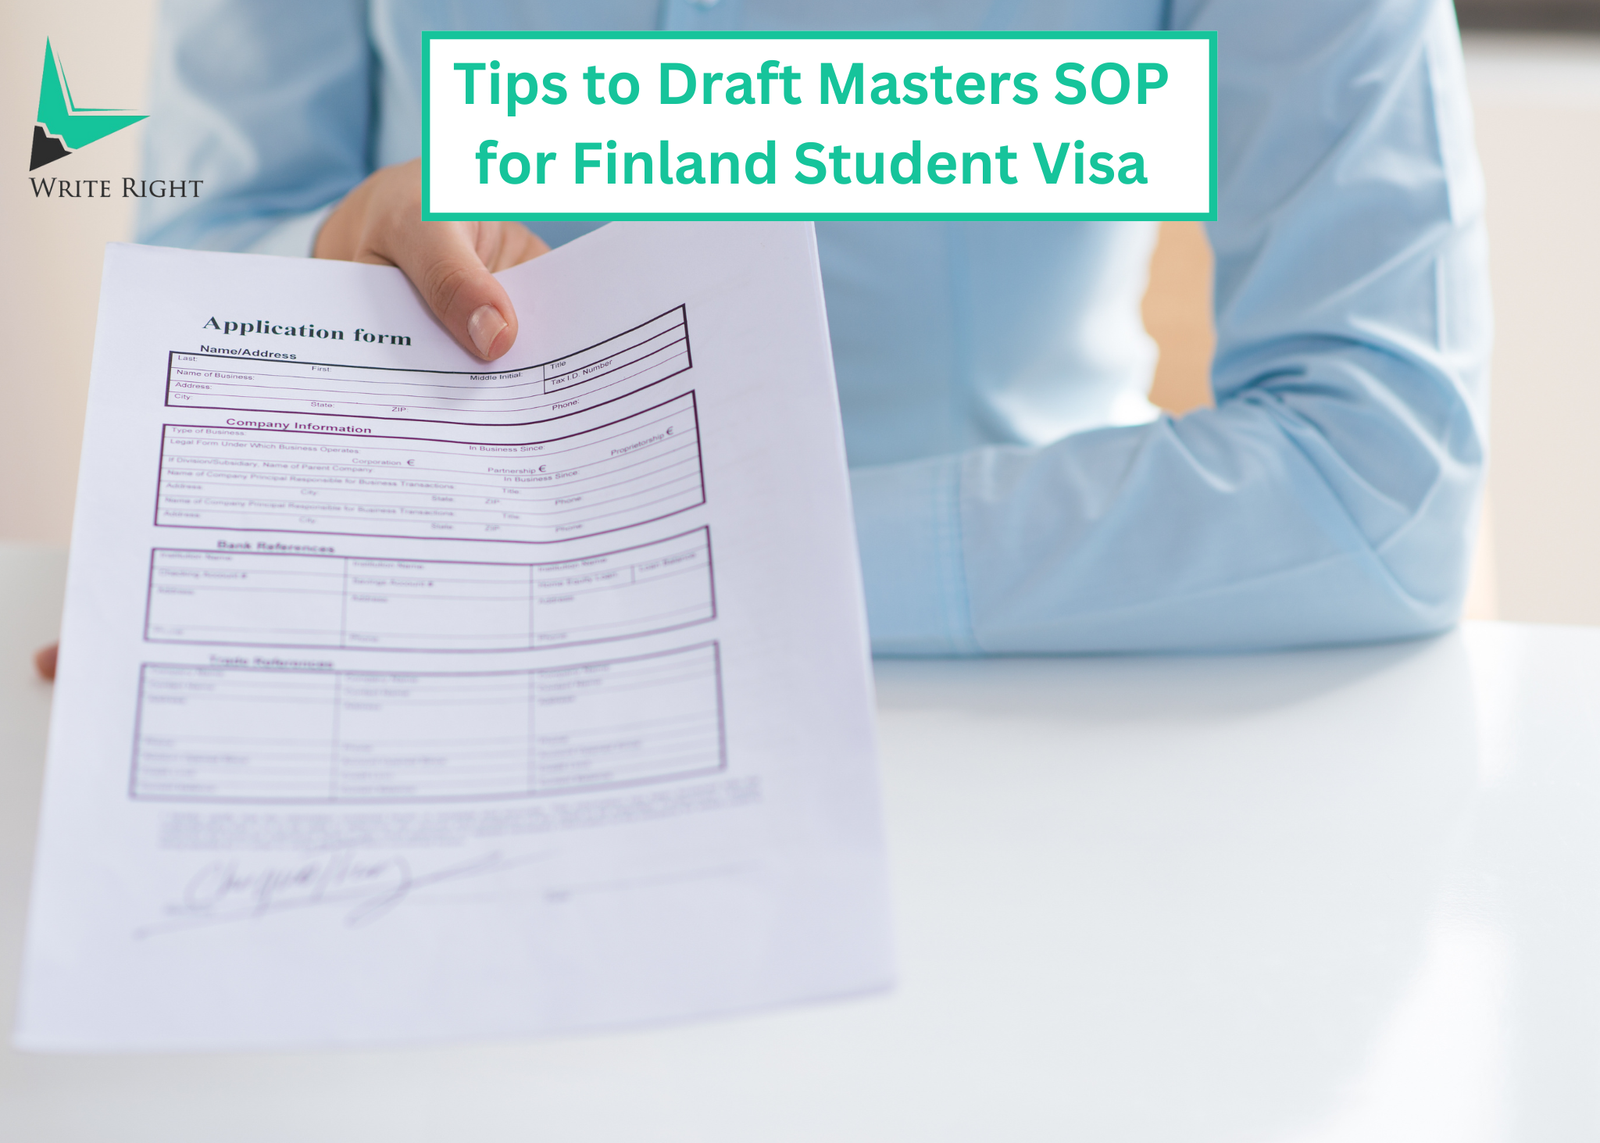 Tips for masters sop for Finland student visa